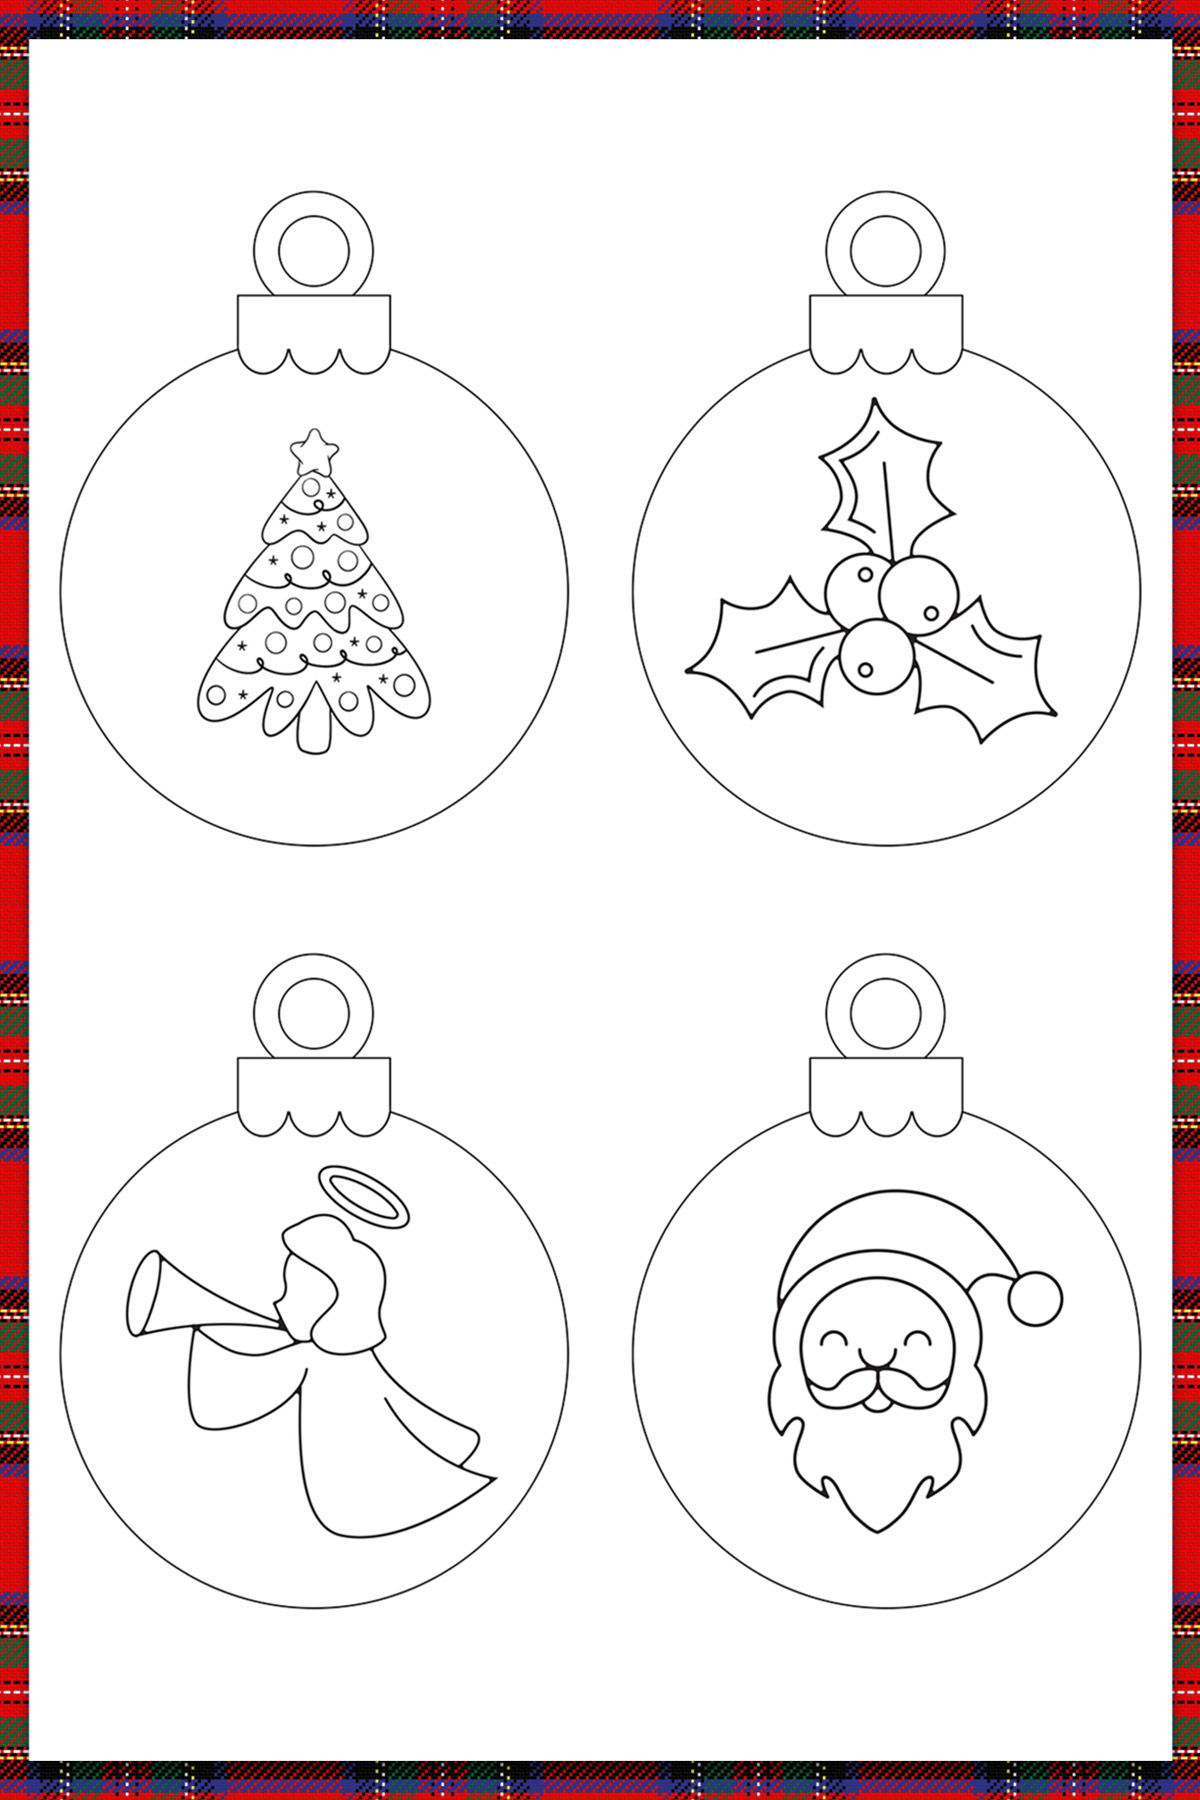 This image is of some of the free Christmas ornaments printable pages you can download at the end of this blog post.